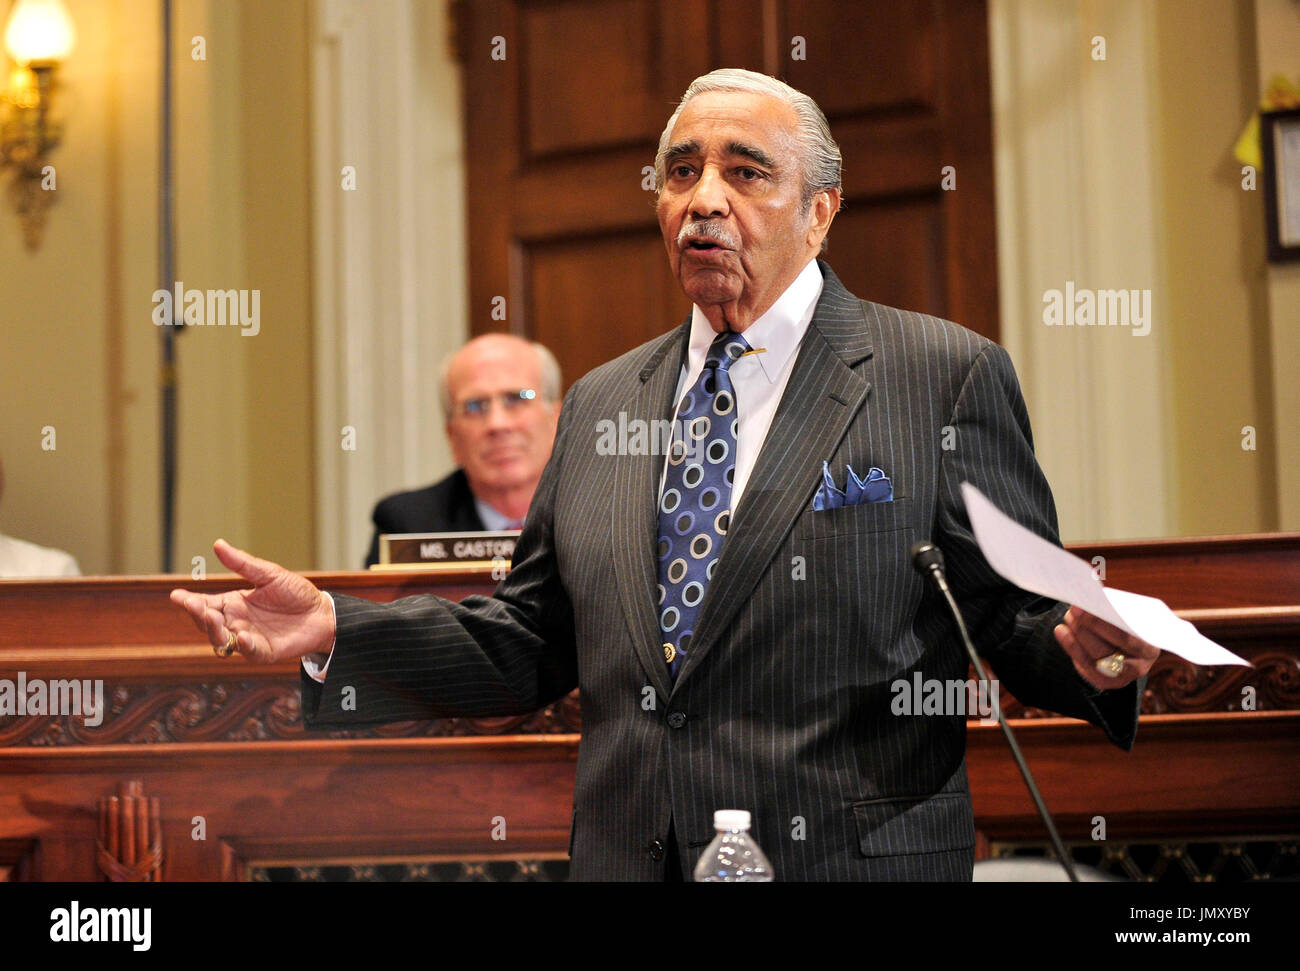 United States Representative Charles Rangel (Democrat of New York) speaks to the U.S. House Committee on Standards of Official Conduct as the committee deliberates his punishment after his conviction on 11 of 13 ethics violations in Washington, D.C. on Thursday, November 18, 2010..Credit: Ron Sachs / CNP.(RESTRICTION: NO New York or New Jersey Newspapers or newspapers within a 75 mile radius of New York City) Stock Photo